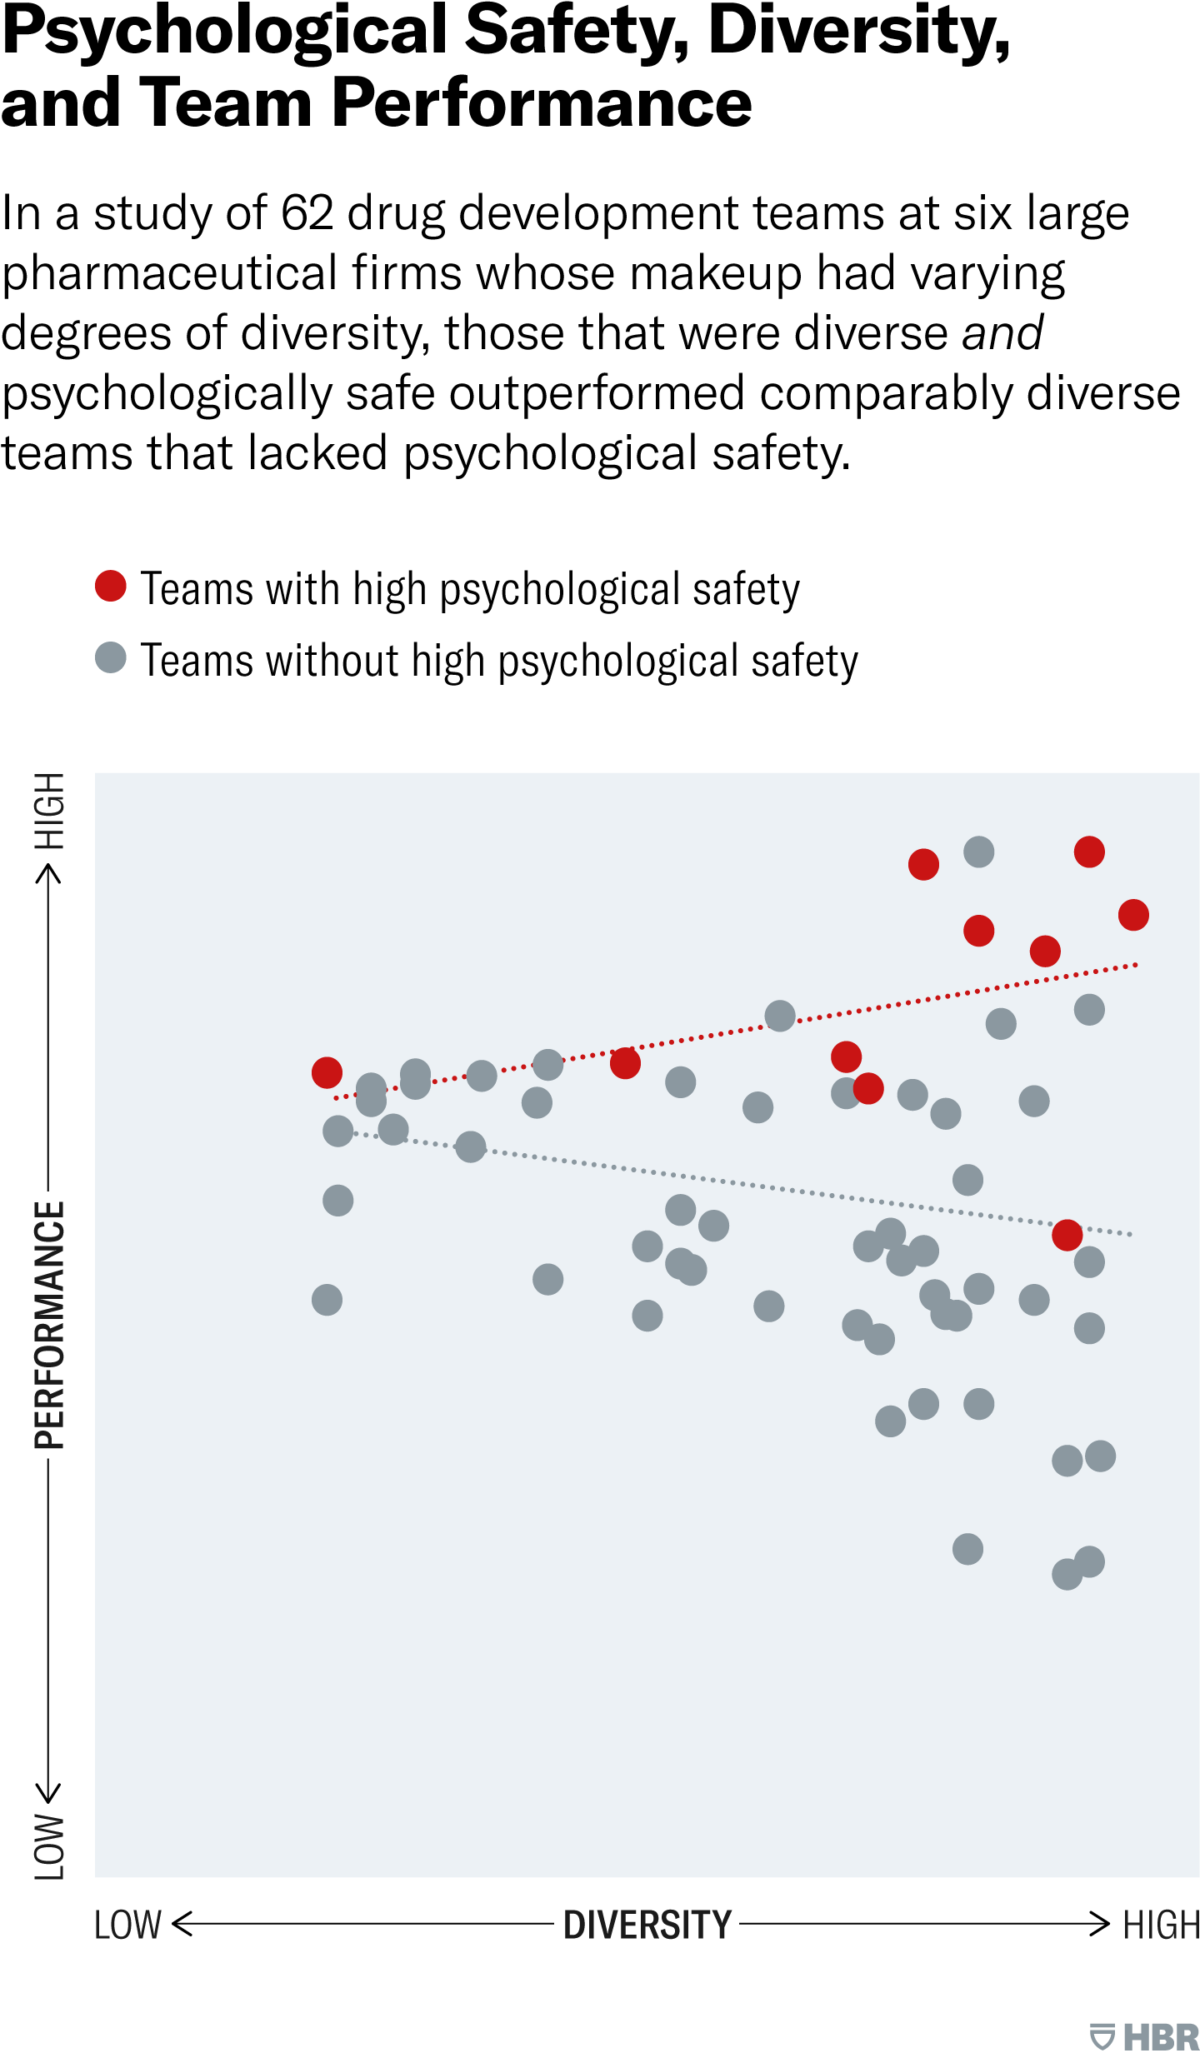 Research: To Excel, Diverse Teams Need Psychological Safety